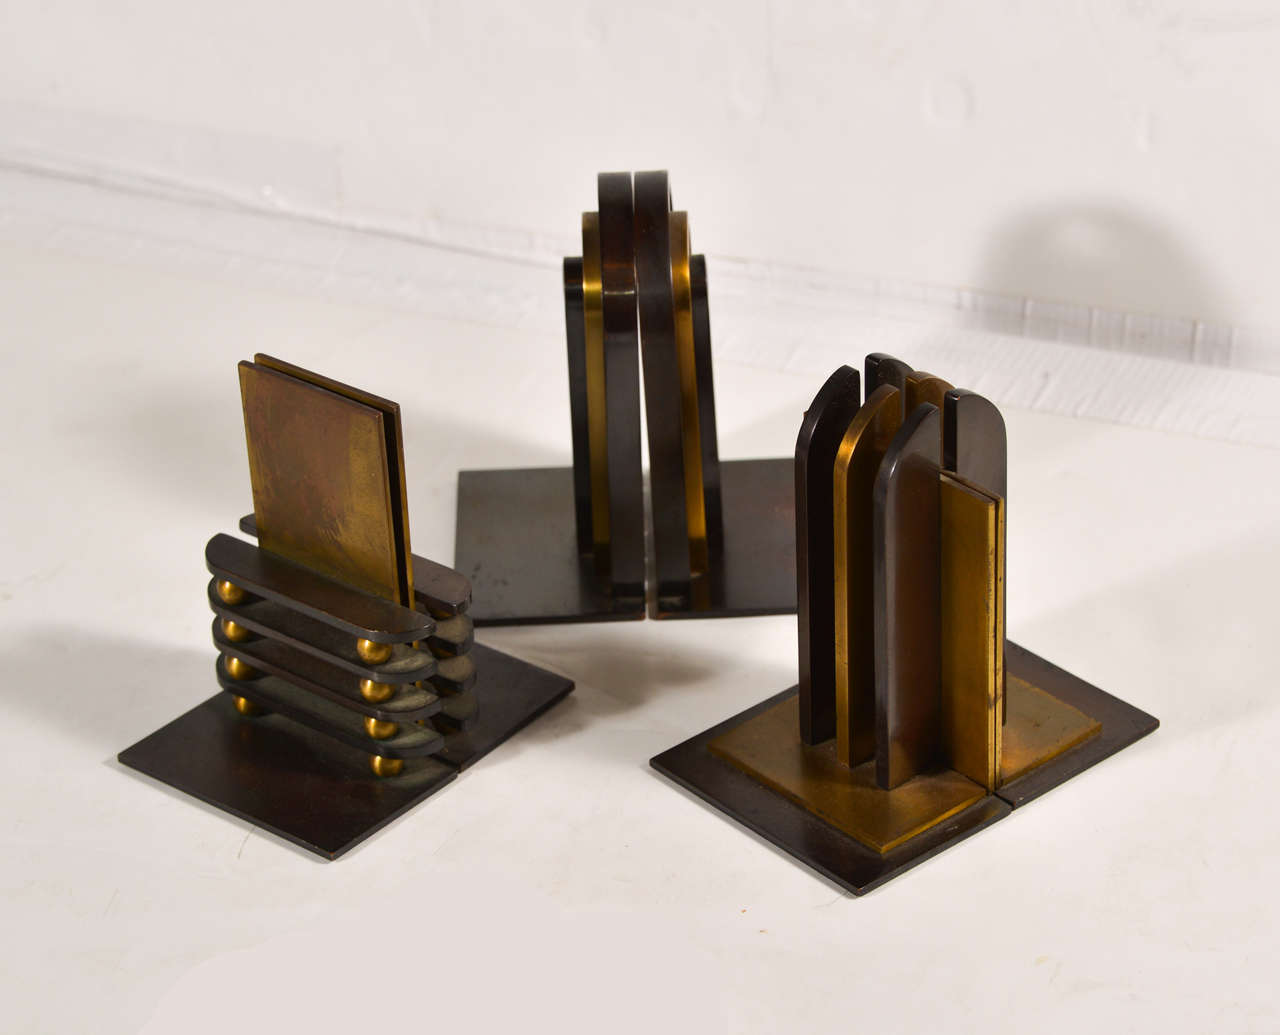 Collection of 3 pairs early Nessen art deco designs for Chase, ca 1933.  Patinated antique brass and English bronze.  Original condition, unpolished .

SOLD Rare Octaball  OCTABALL HAVE BEEN SOLD
Classic Gothic
SOLD Stepped Arch  SOLD

PRICED